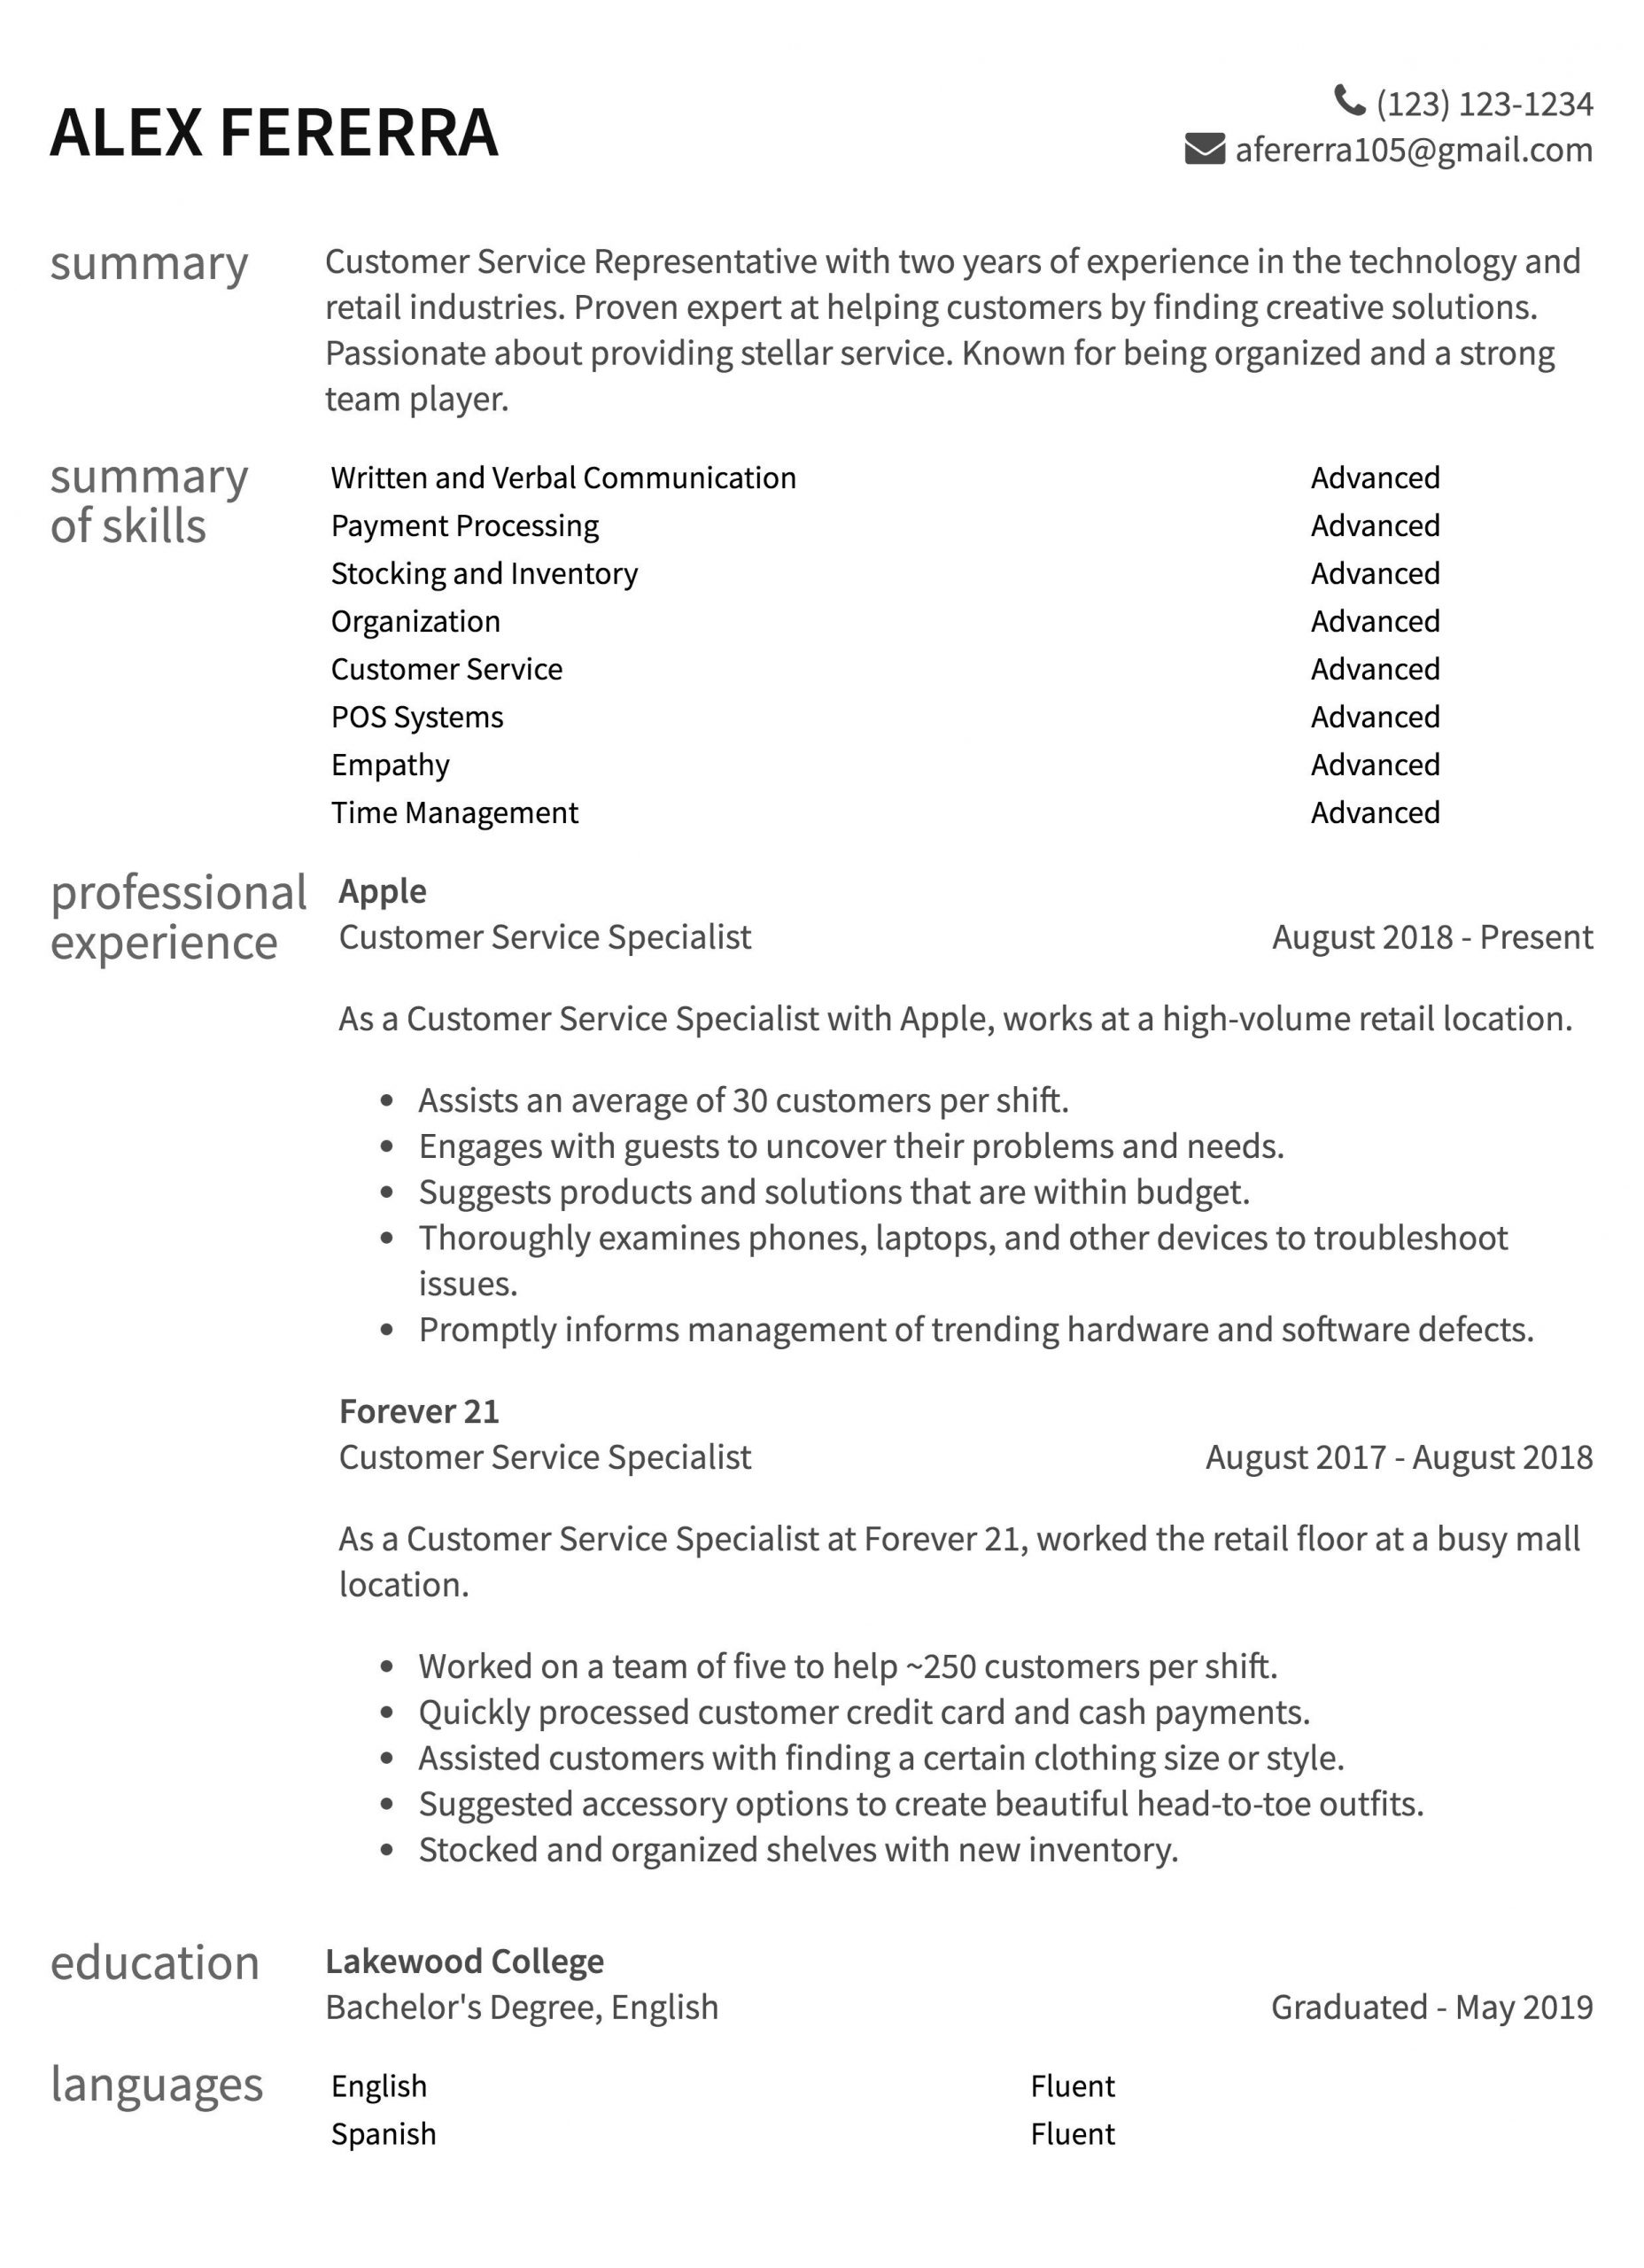 customer service resume examples